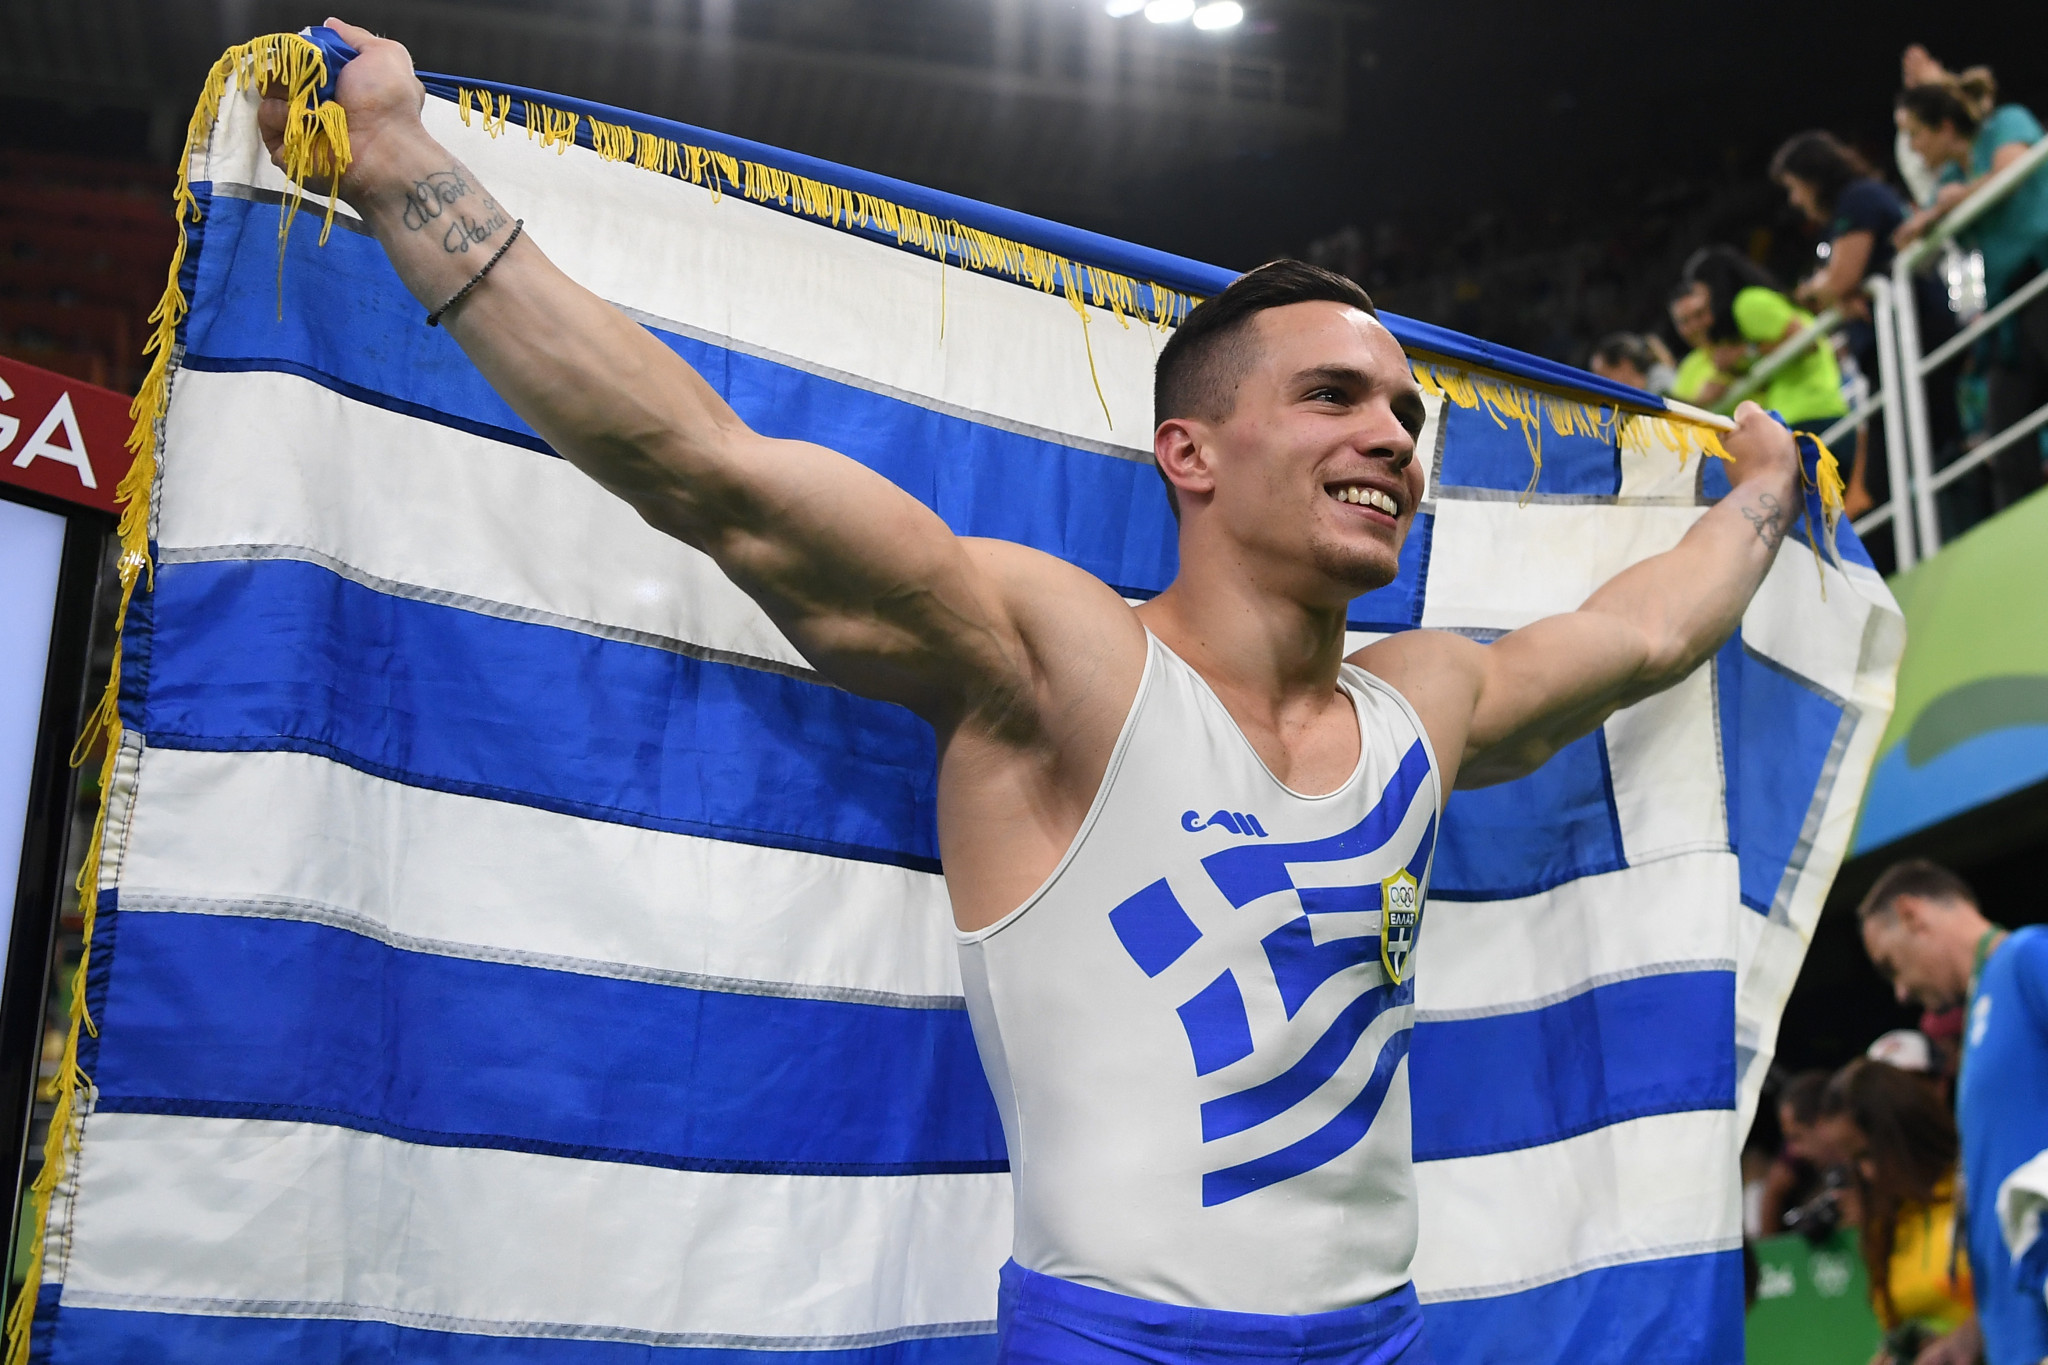 Eleftherios Petrounias went on to become an Olympic champion in 2016 after he was the first runner ©Getty Images